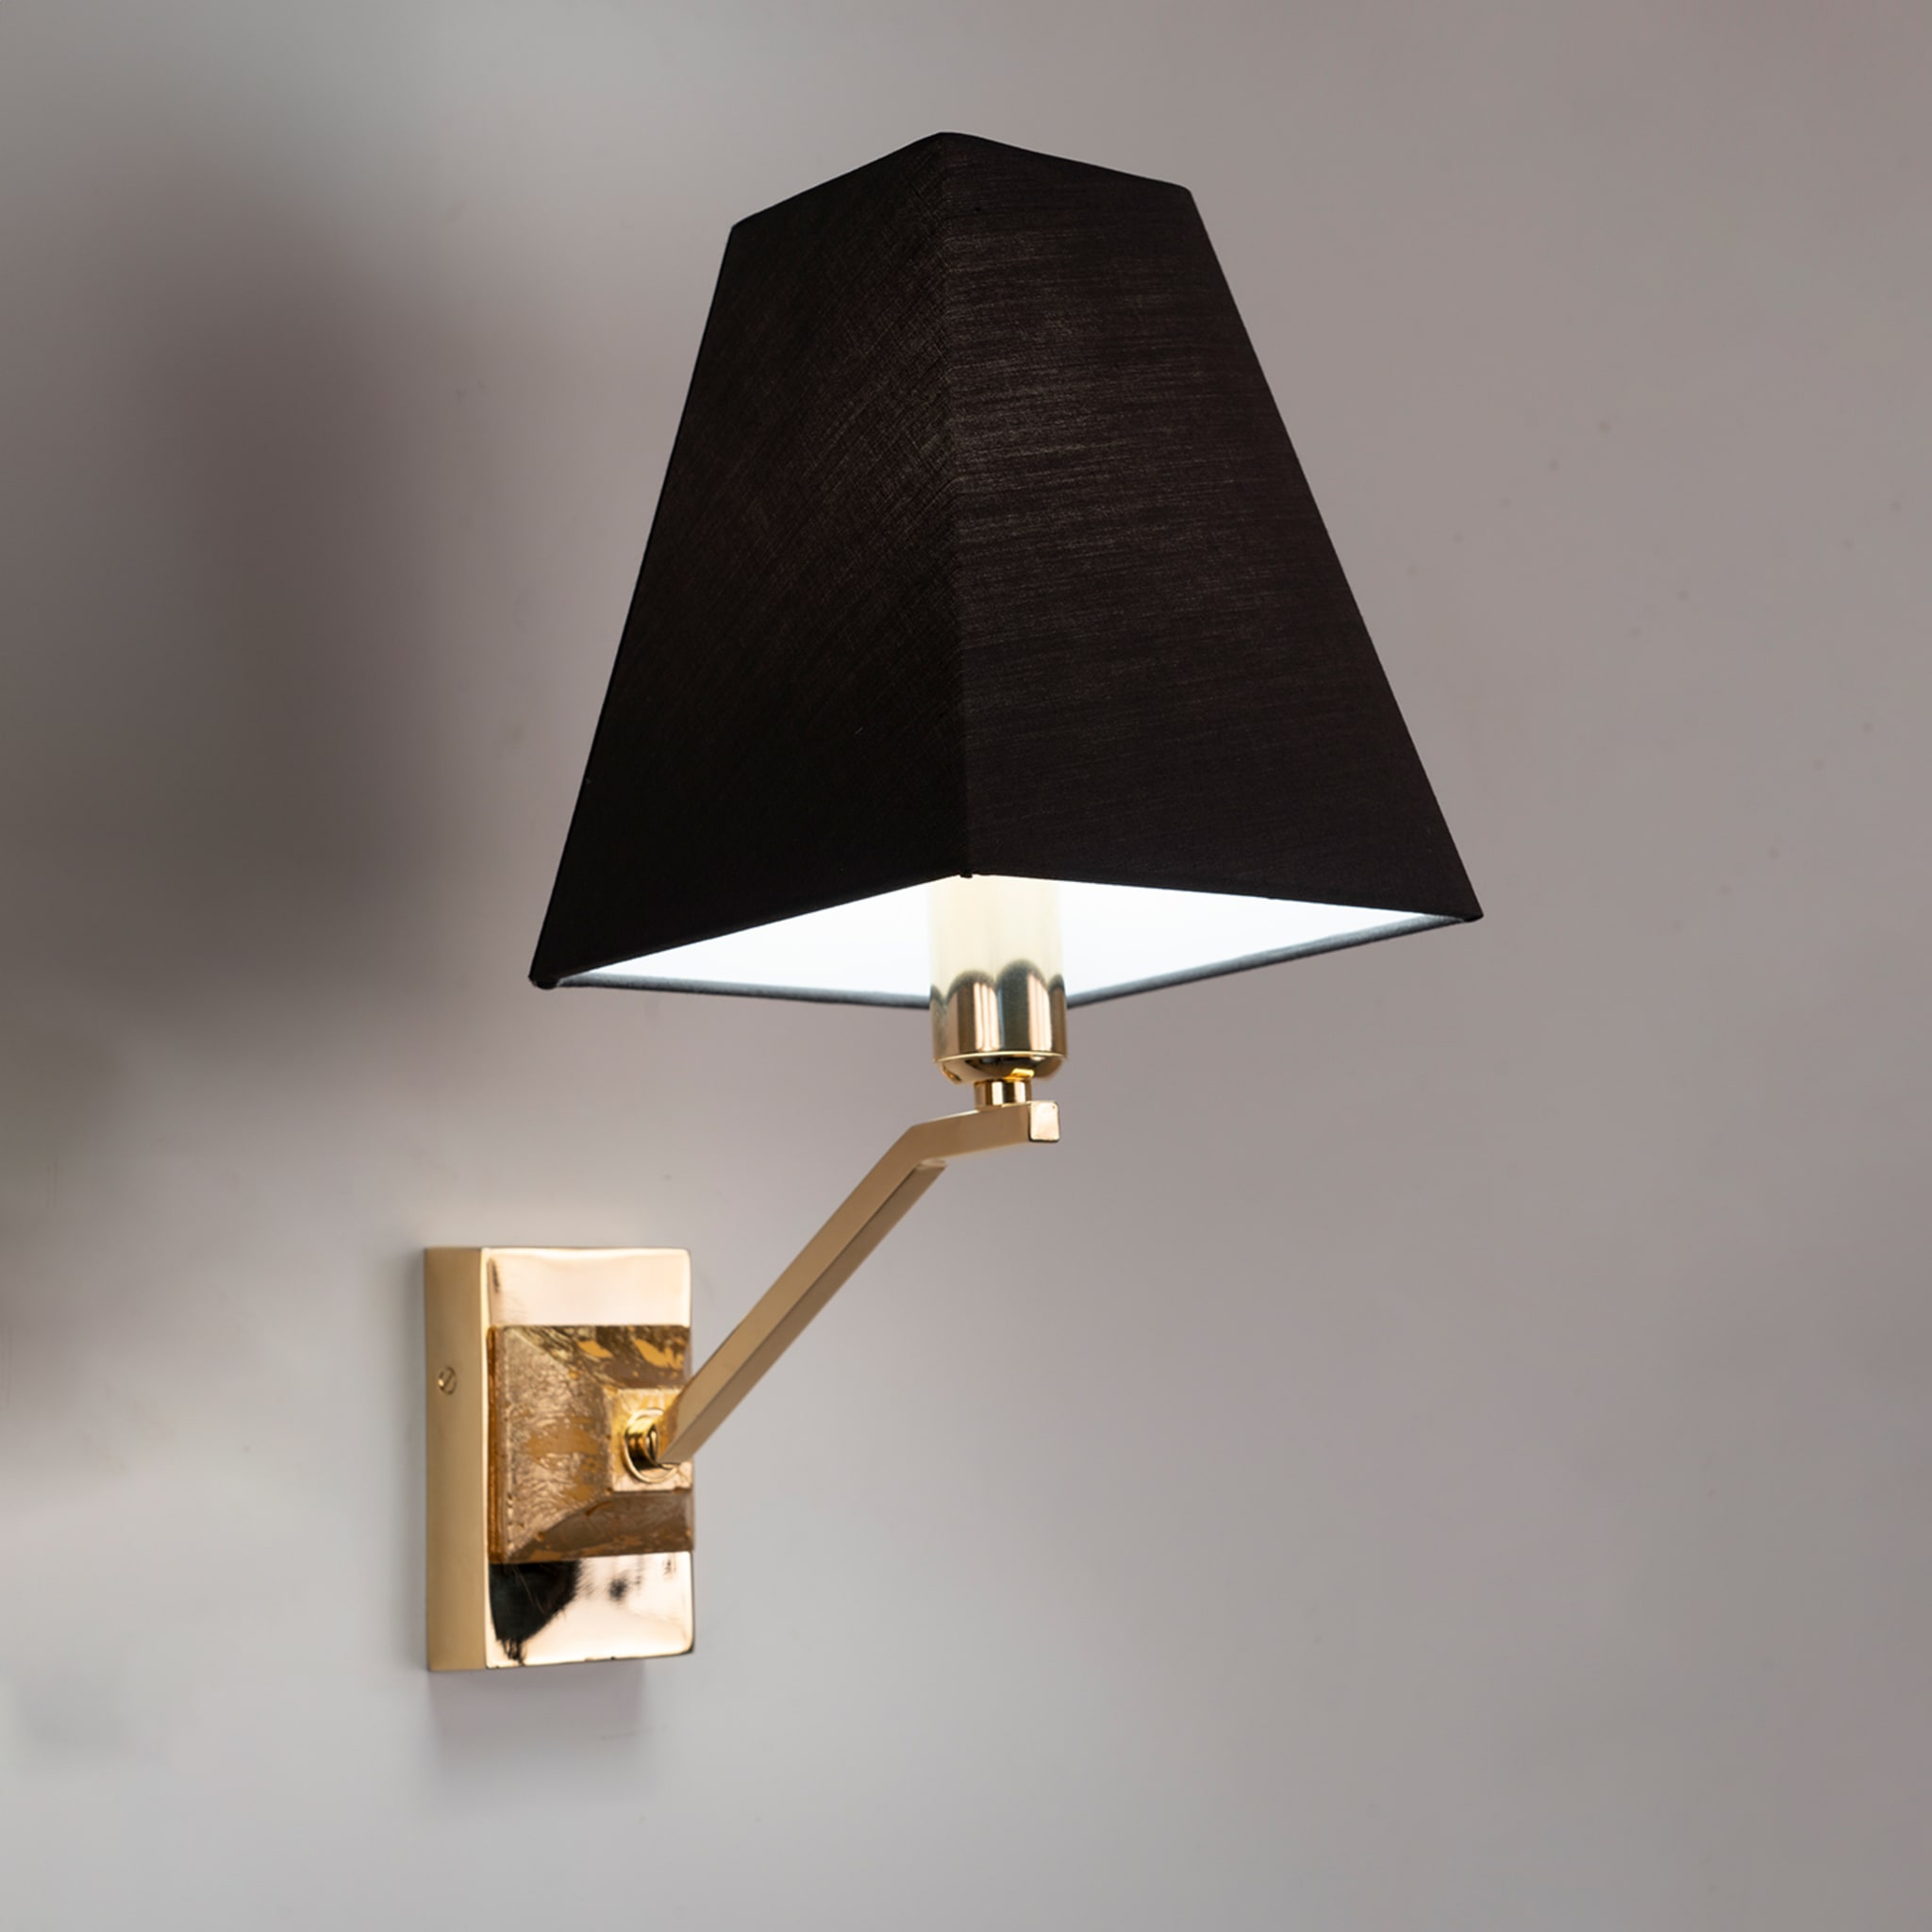 Anthracite-Gray & Golden Sconce - Alternative view 1